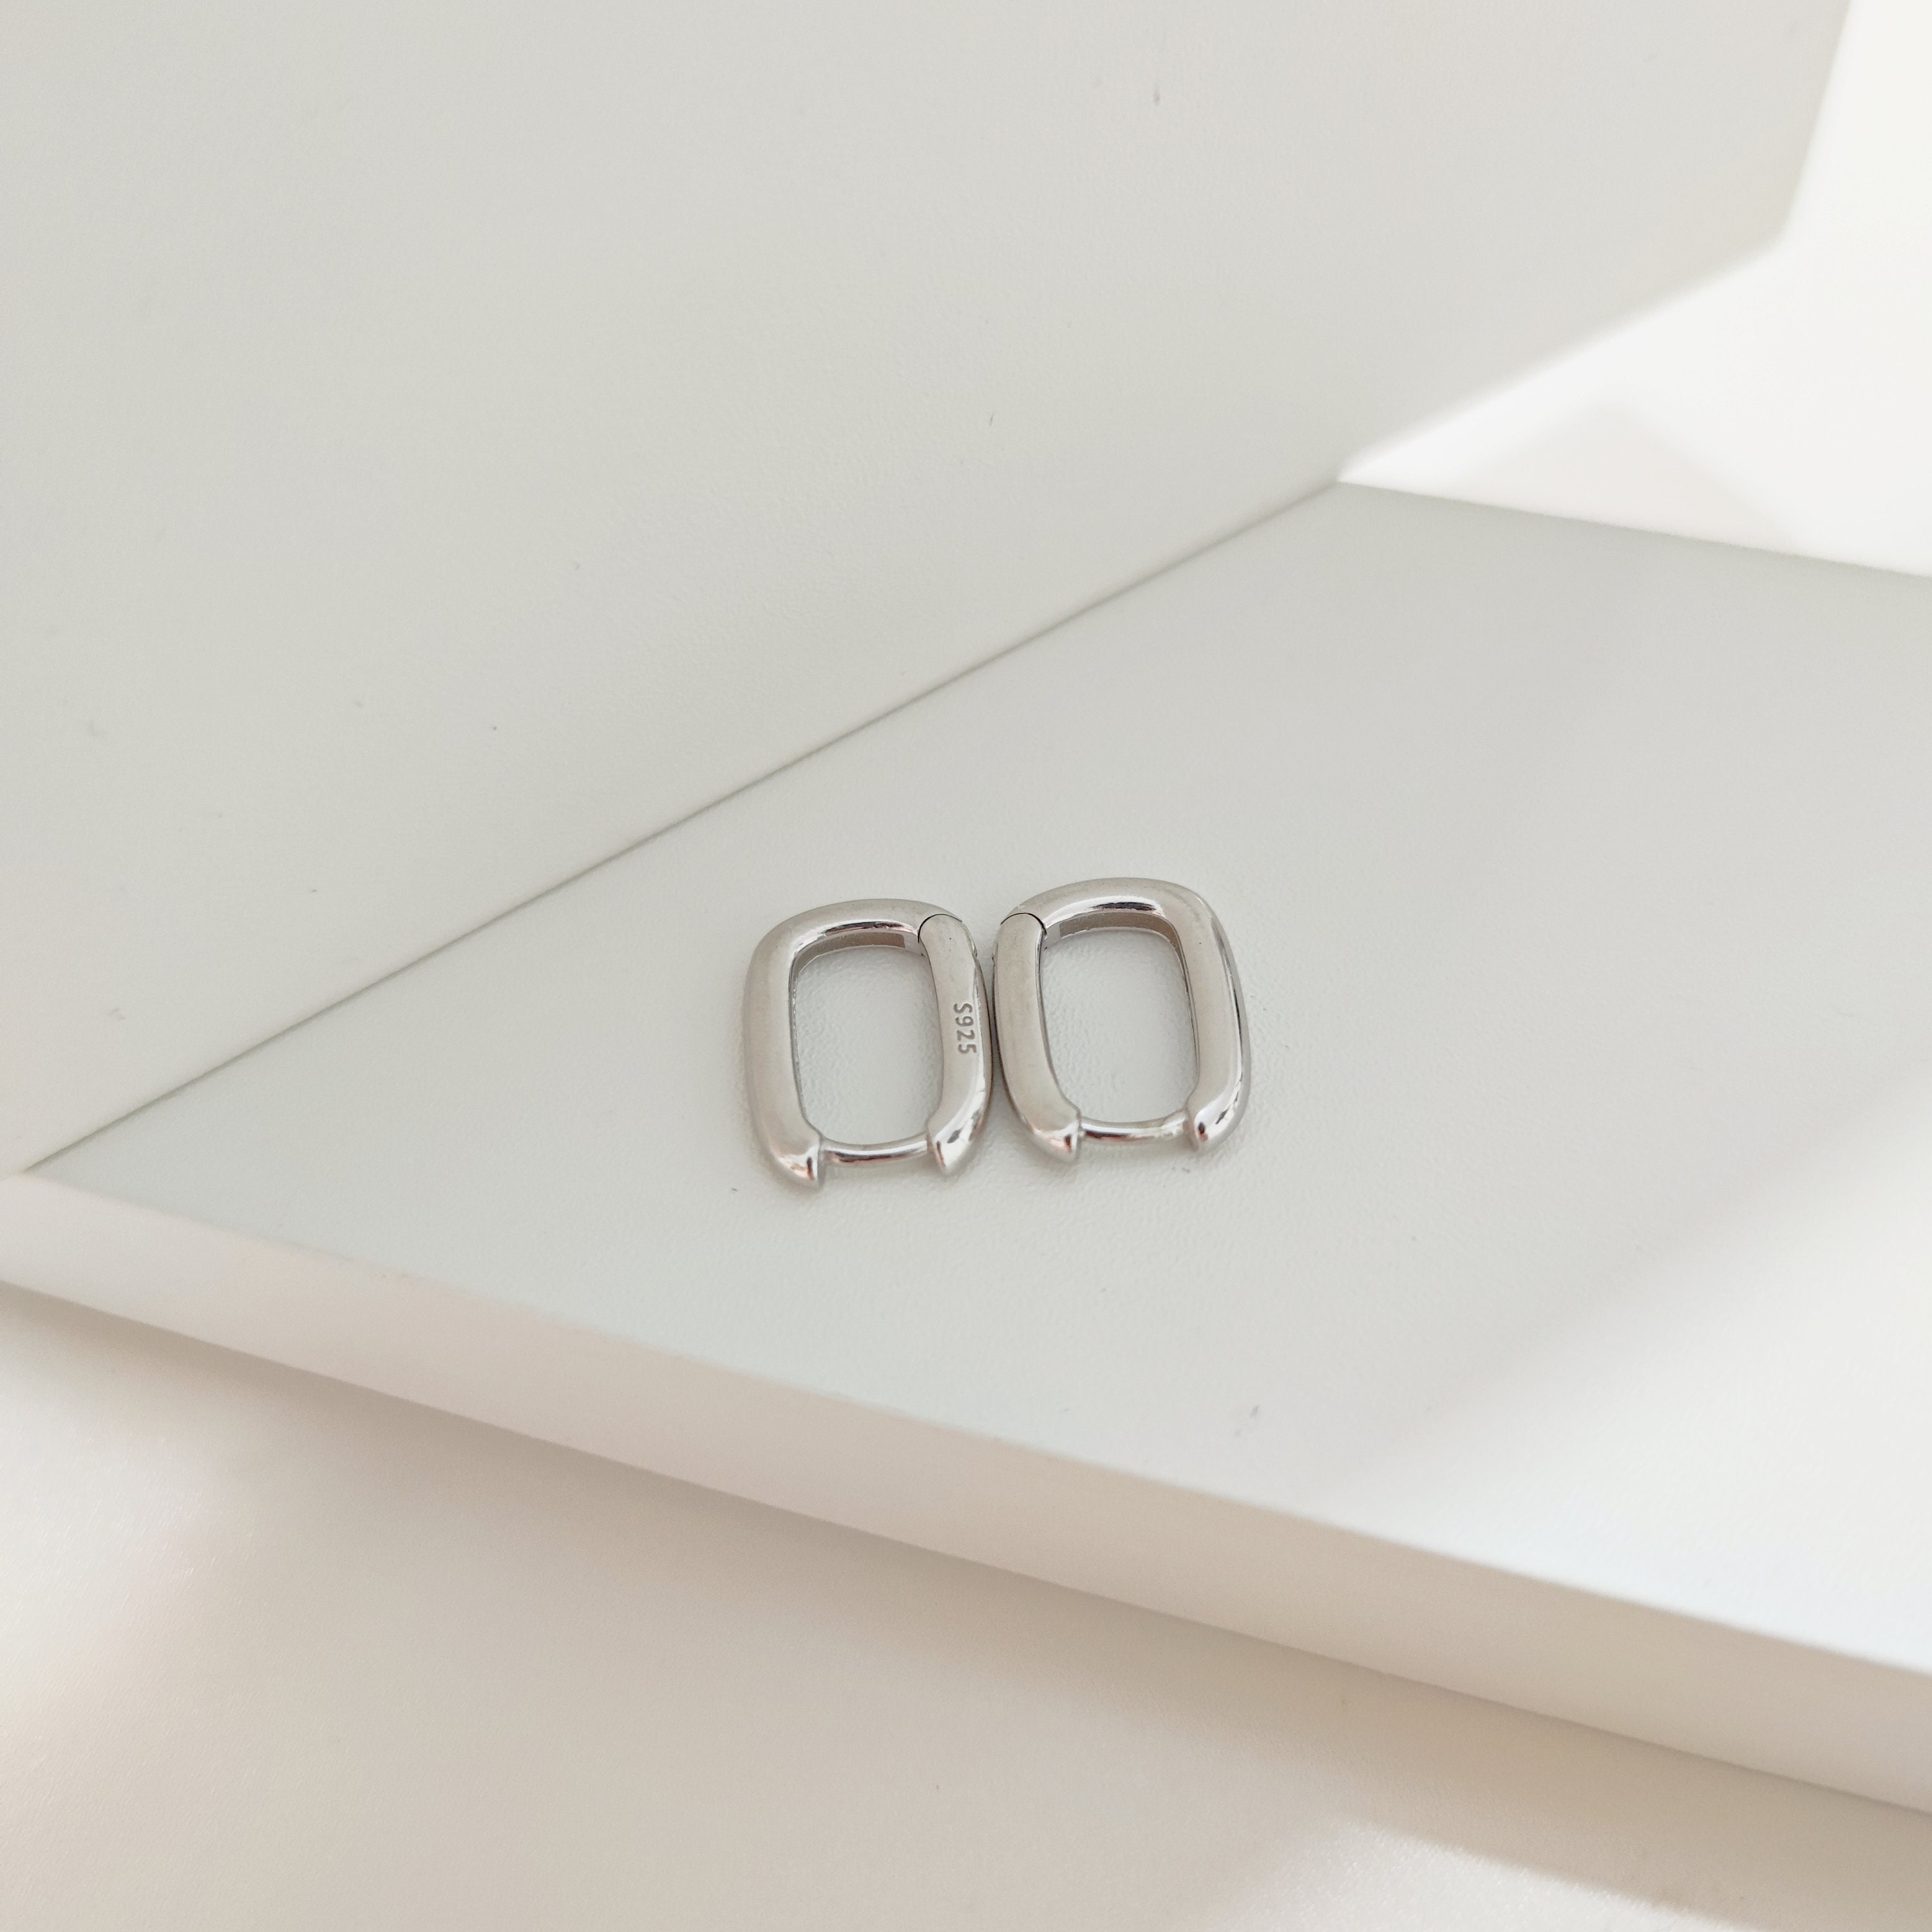 Sterling Silver Small Rectangular Earrings, Silver or Gold, Square Oval  Hoop Earrings, Chunky Hoop Earrings, Dainty Jewelry Gift for Her - Etsy  Israel